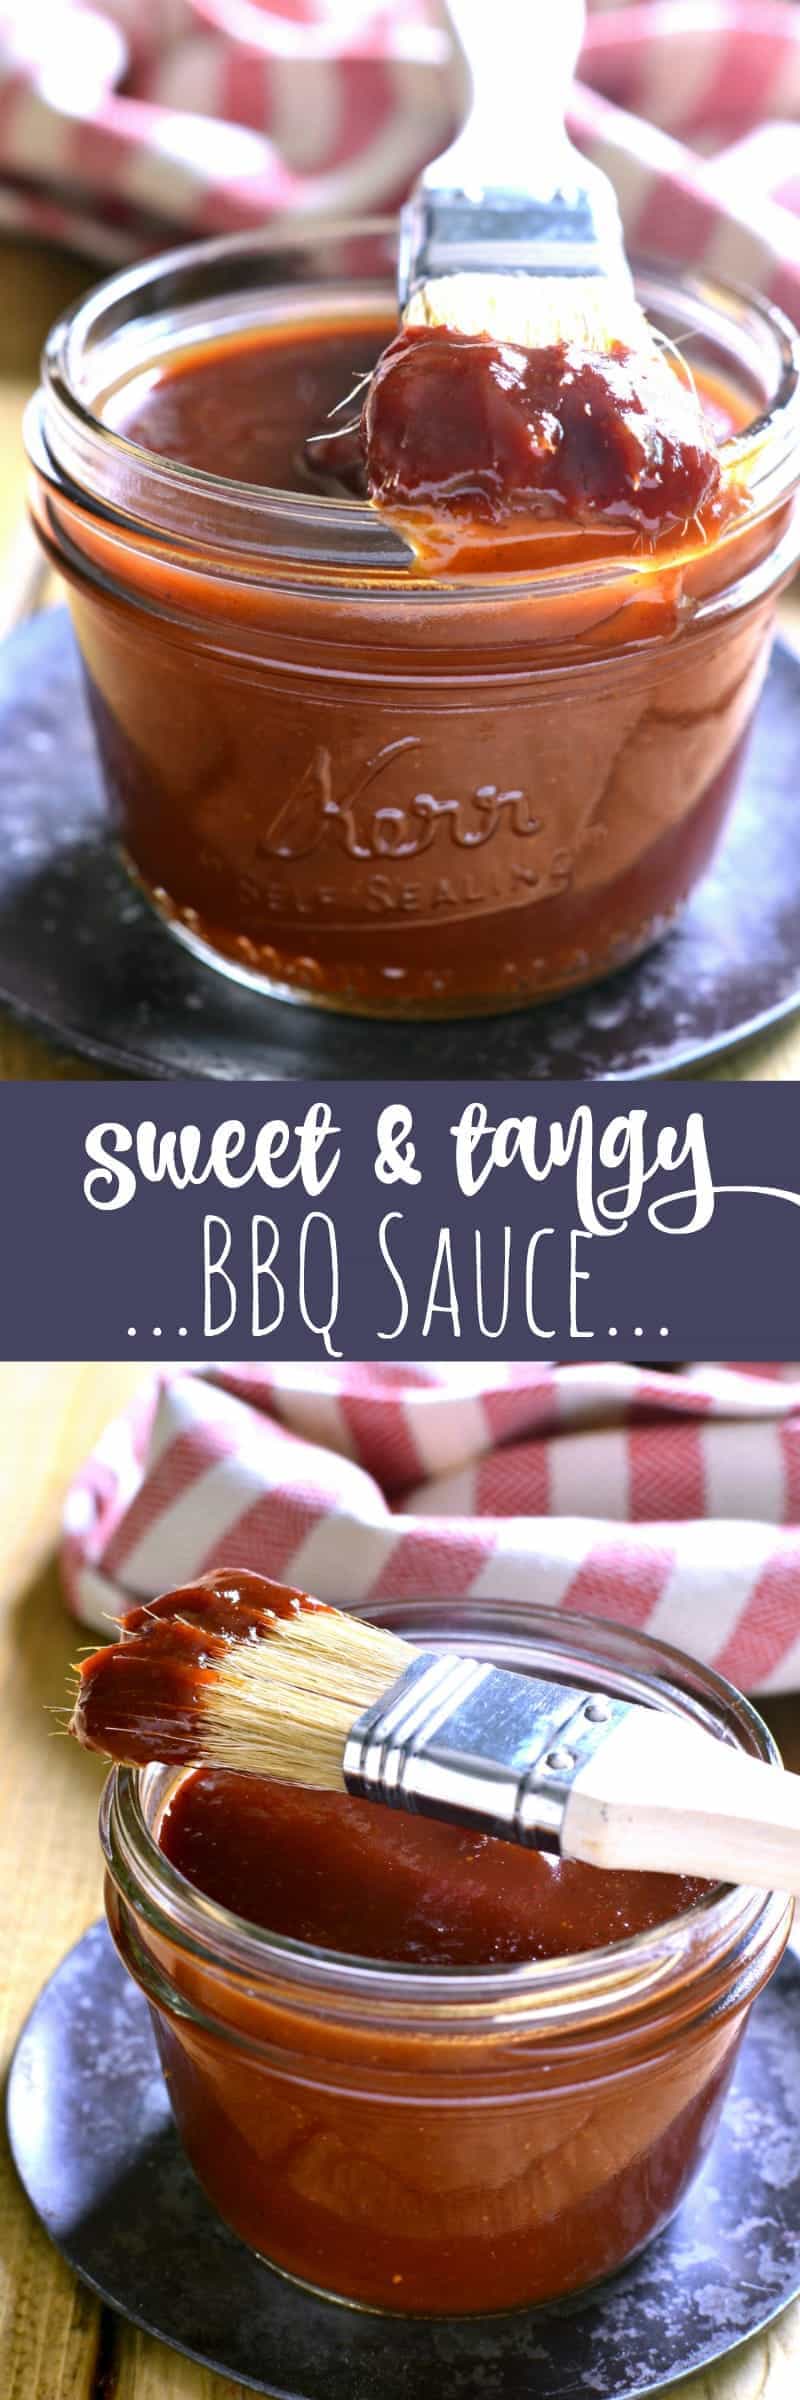 This Sweet & Tangy BBQ Sauce is the BEST blend of flavors with just the right amount of spice - perfect for summer grilling and destined to become a favorite!